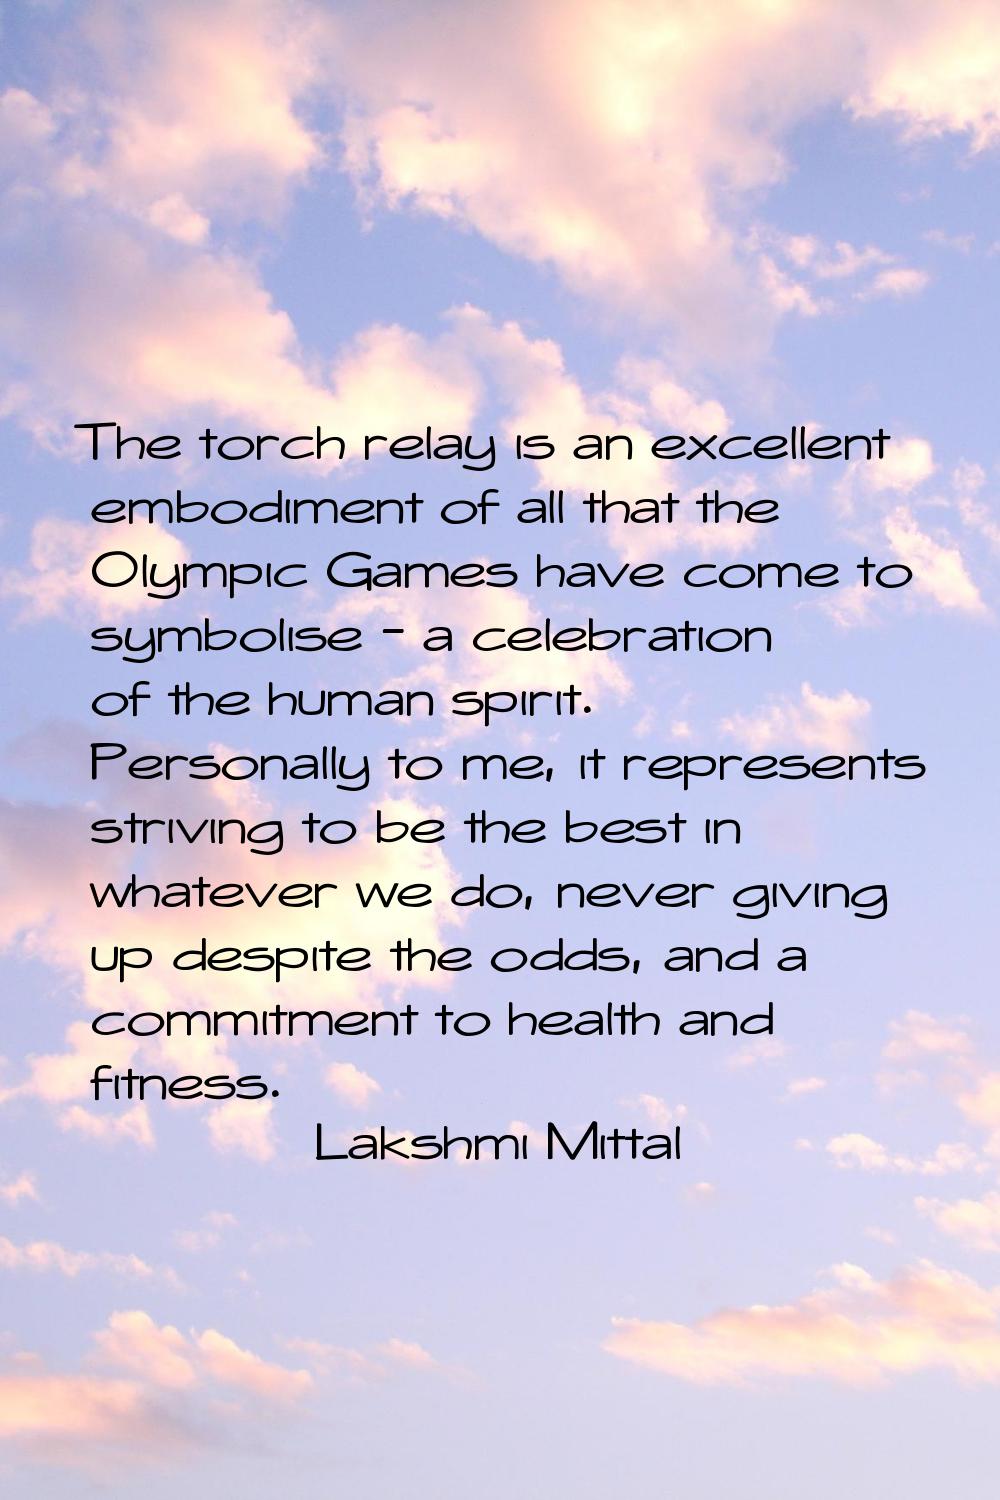 The torch relay is an excellent embodiment of all that the Olympic Games have come to symbolise - a